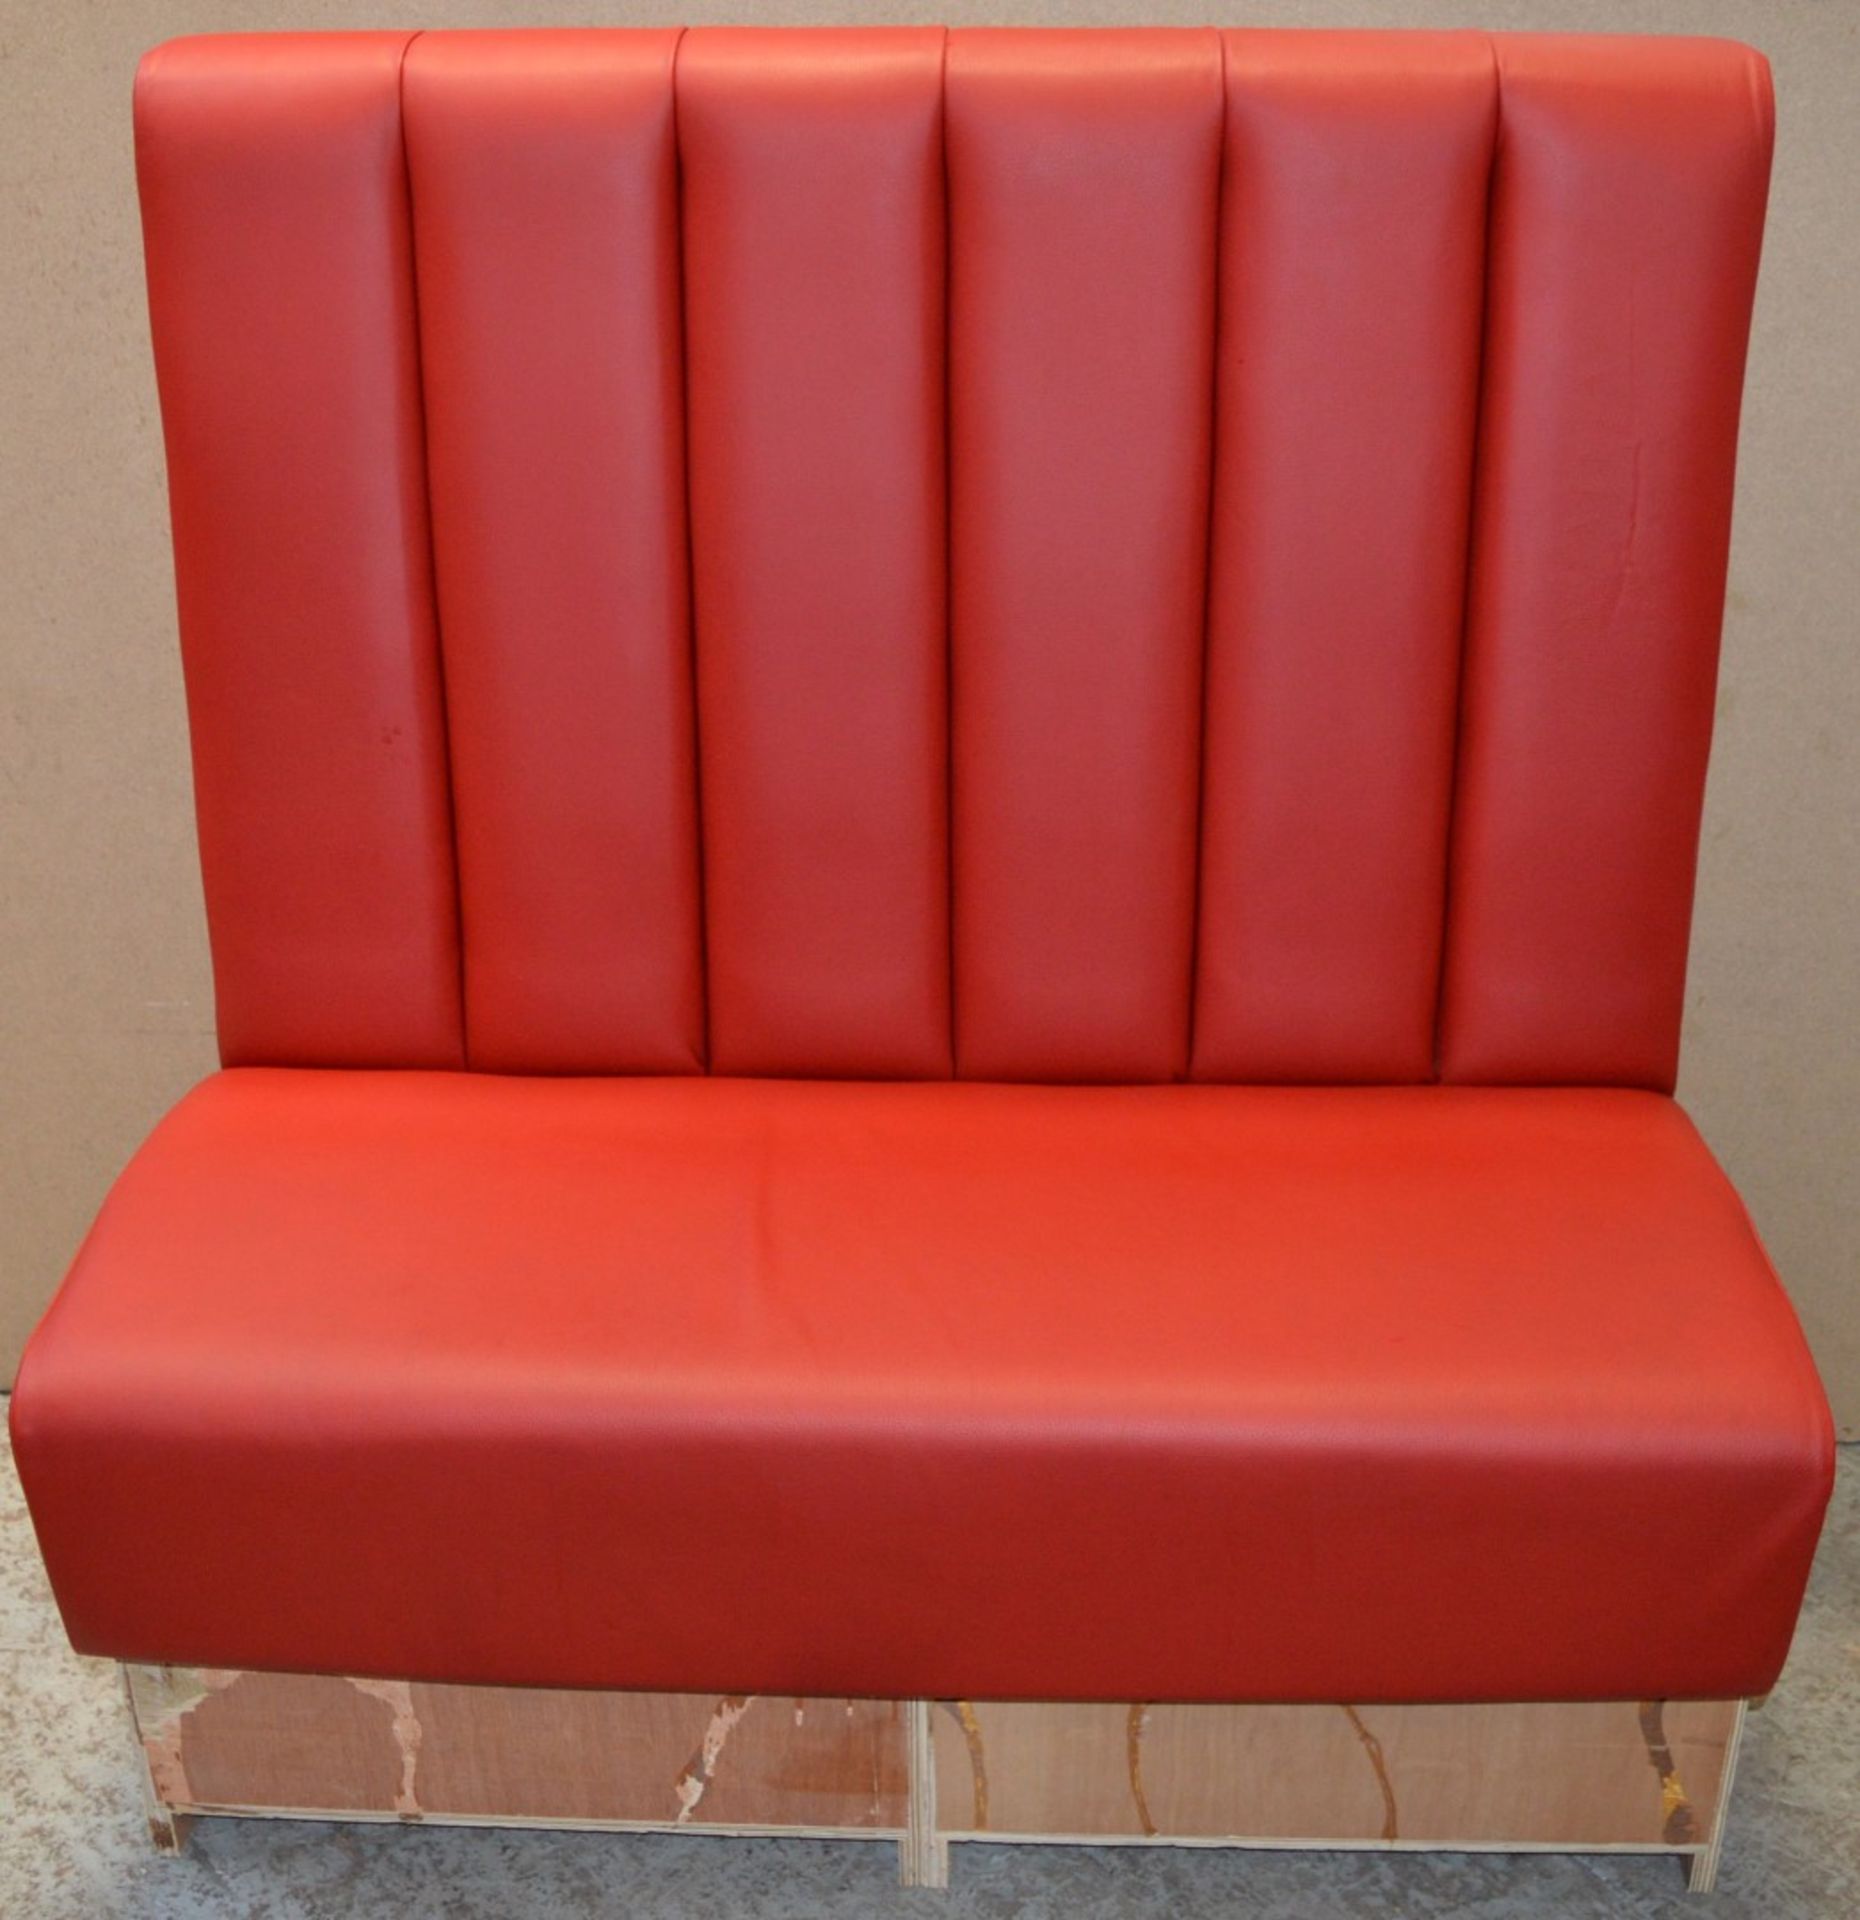 1 x High Back Single Seating Bench Upholstered in Red Leather - Sits upto Two People - High